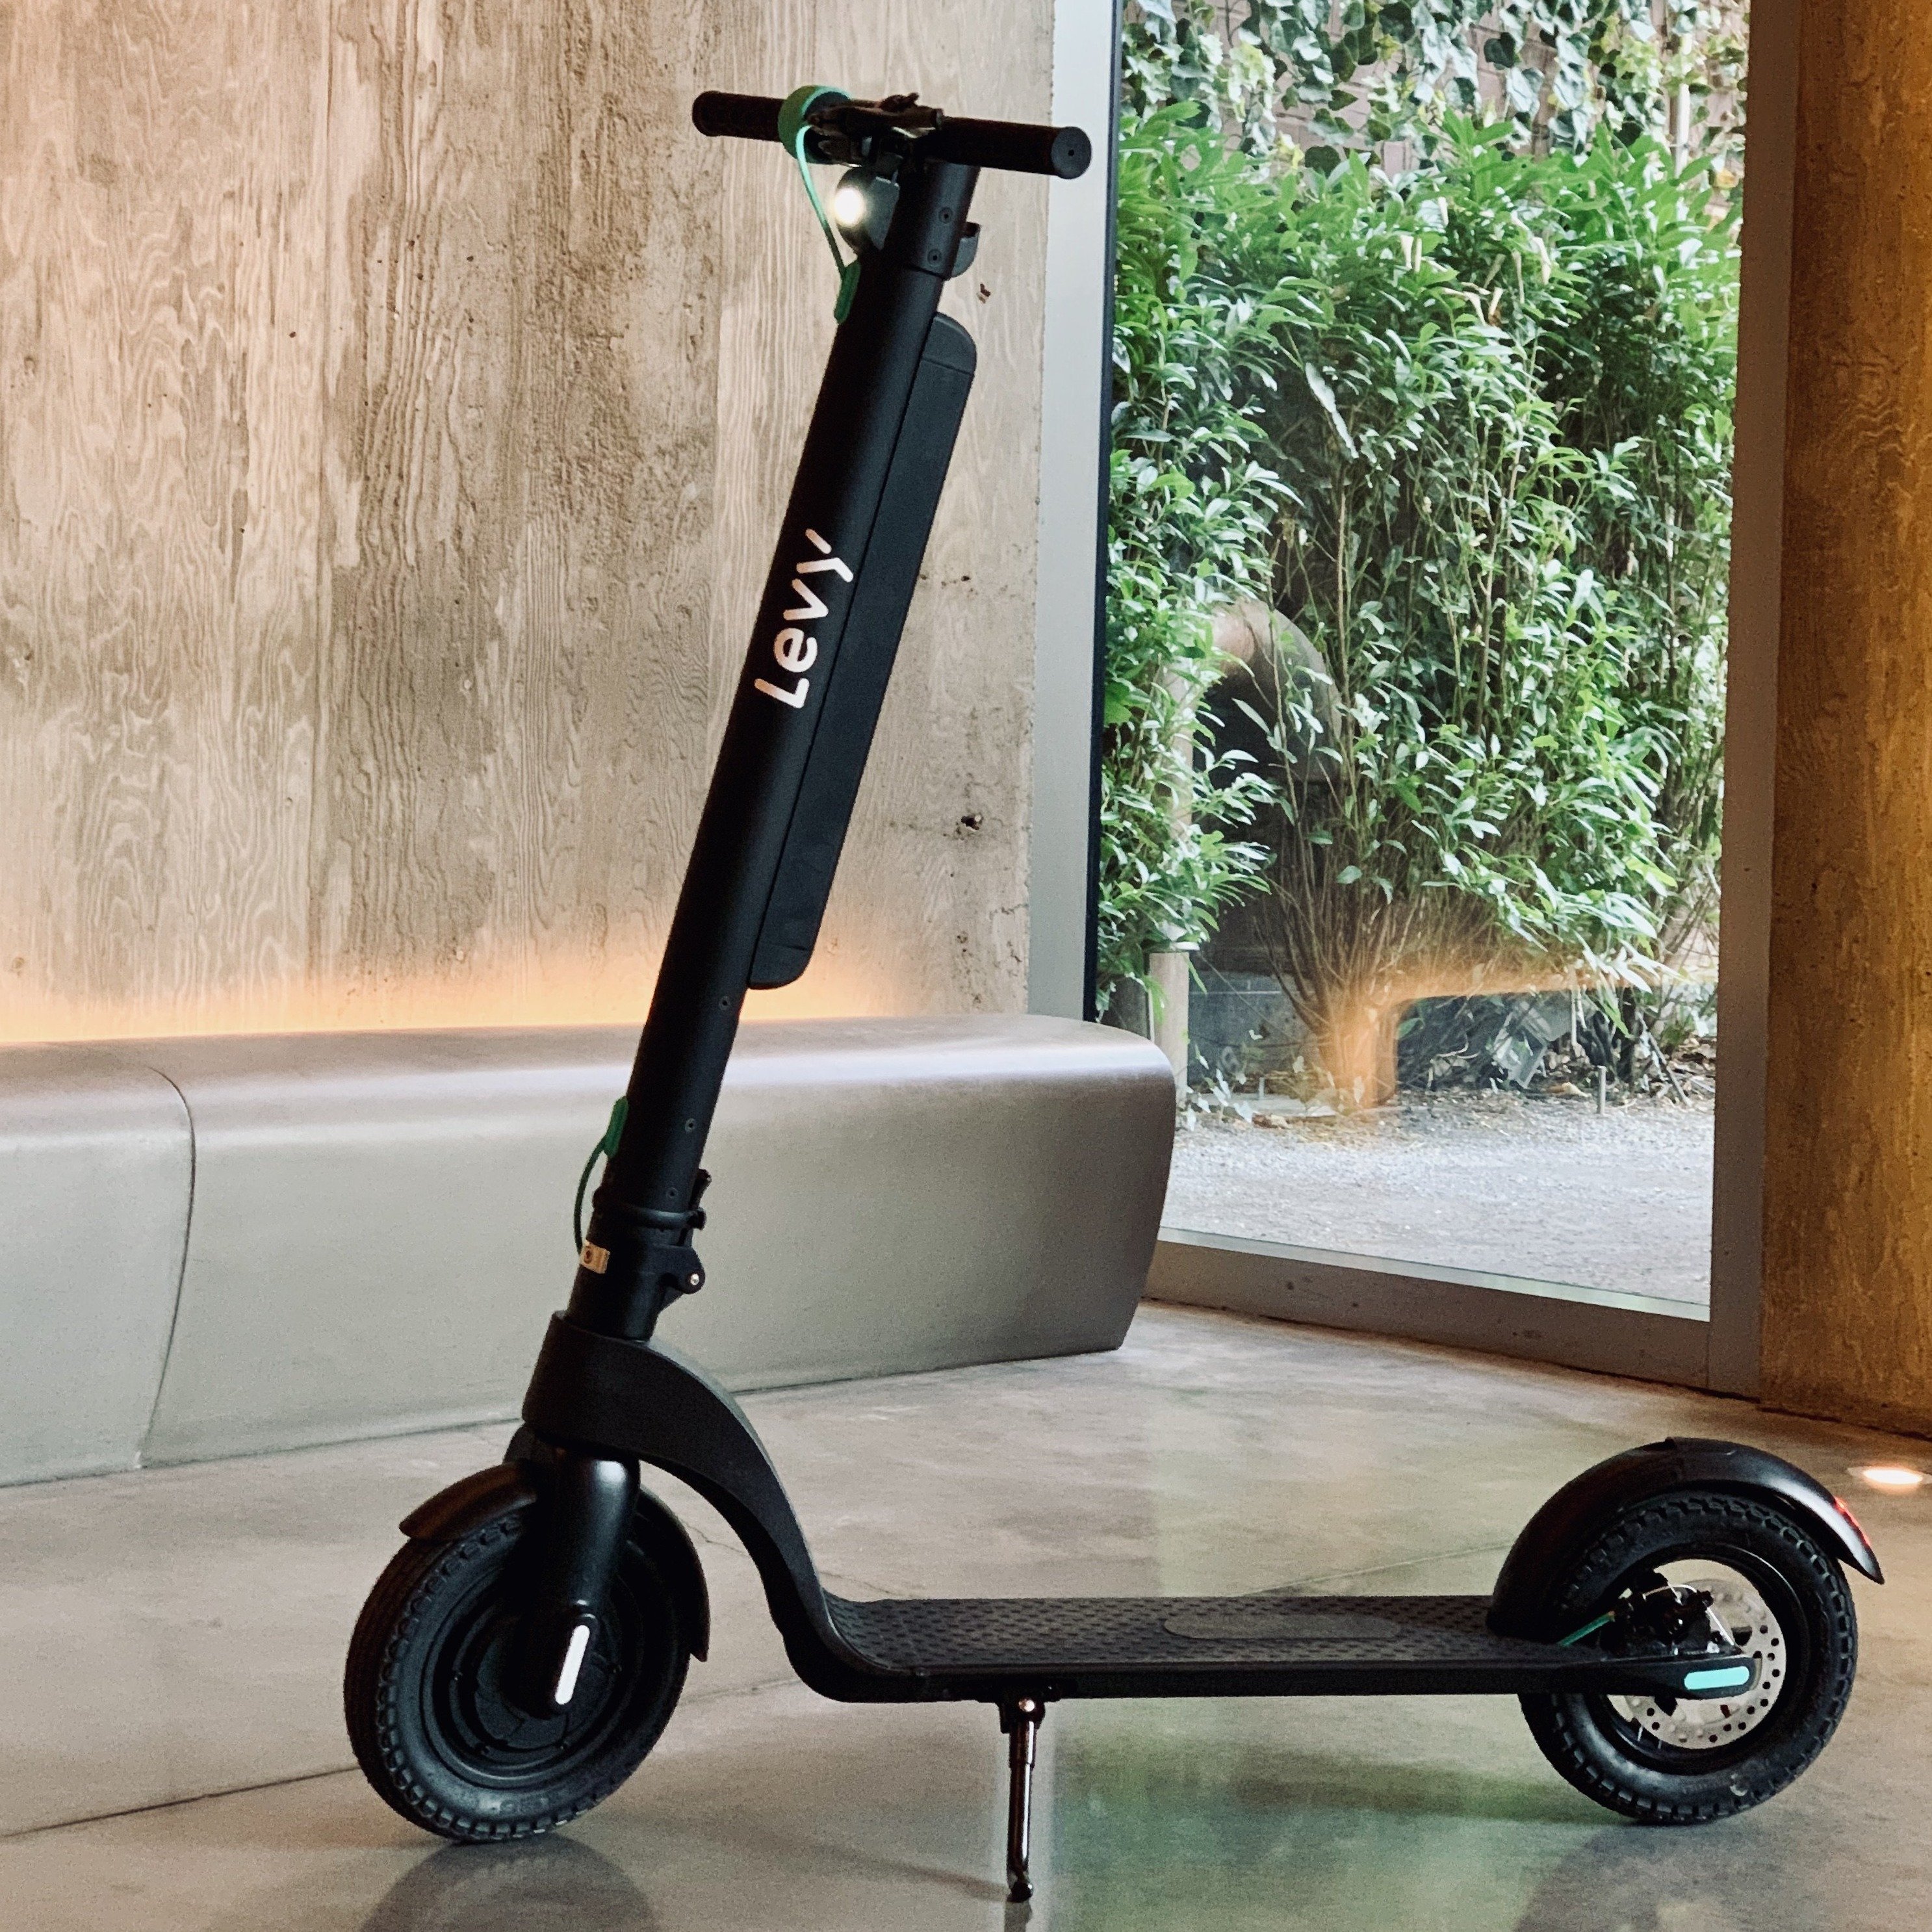 The Levy Plus Electric Scooter - image 4 of 4